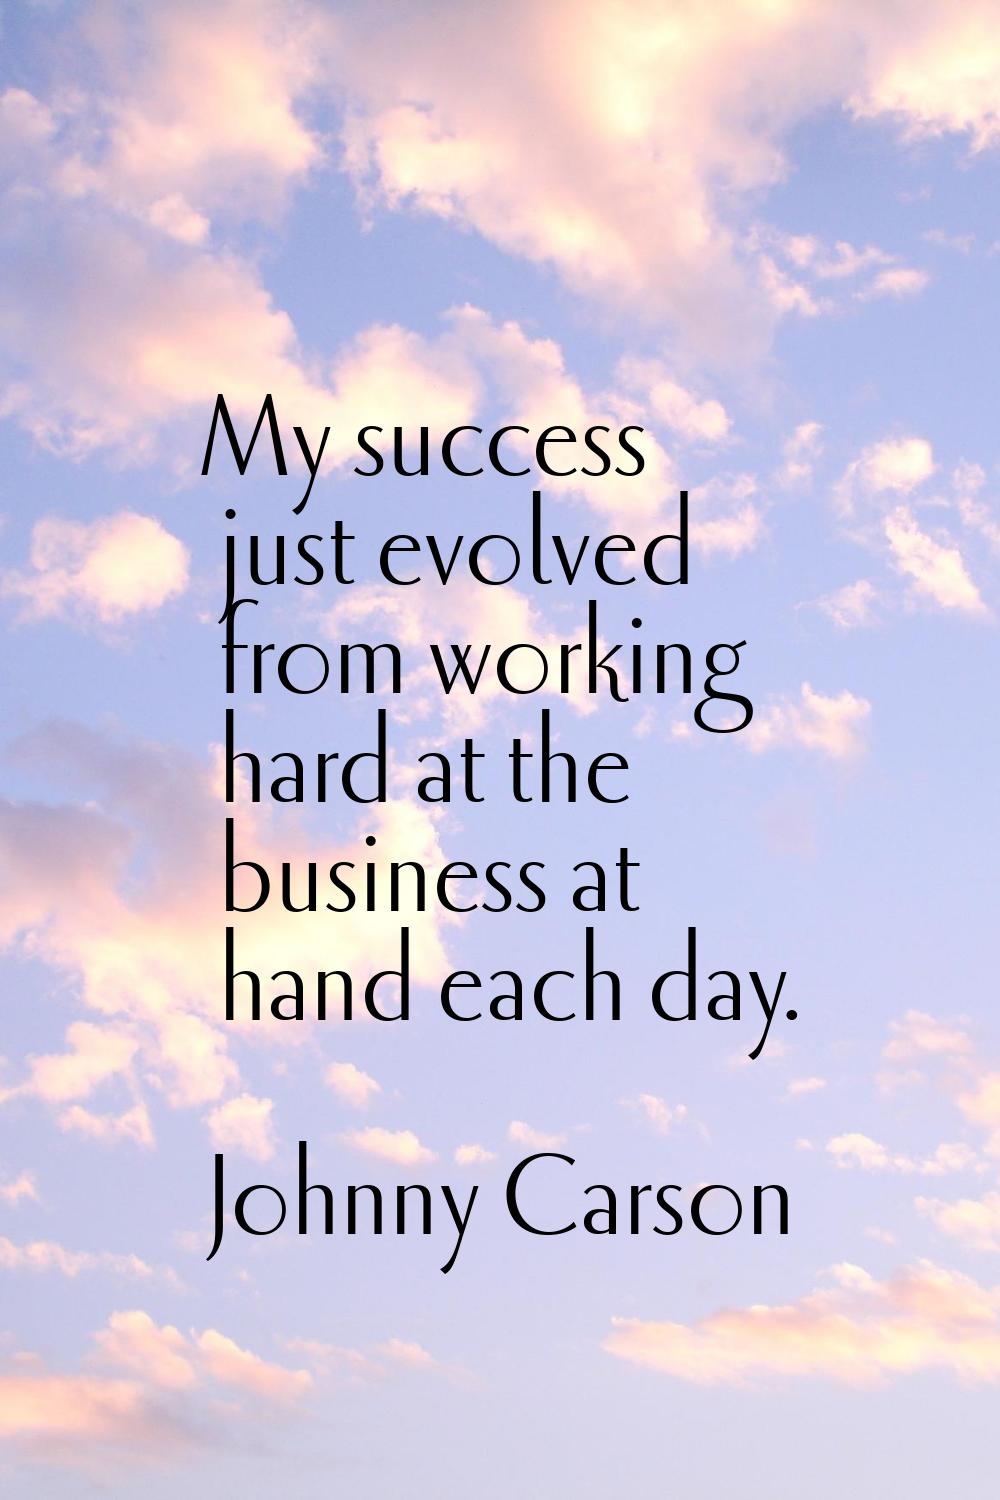 My success just evolved from working hard at the business at hand each day.